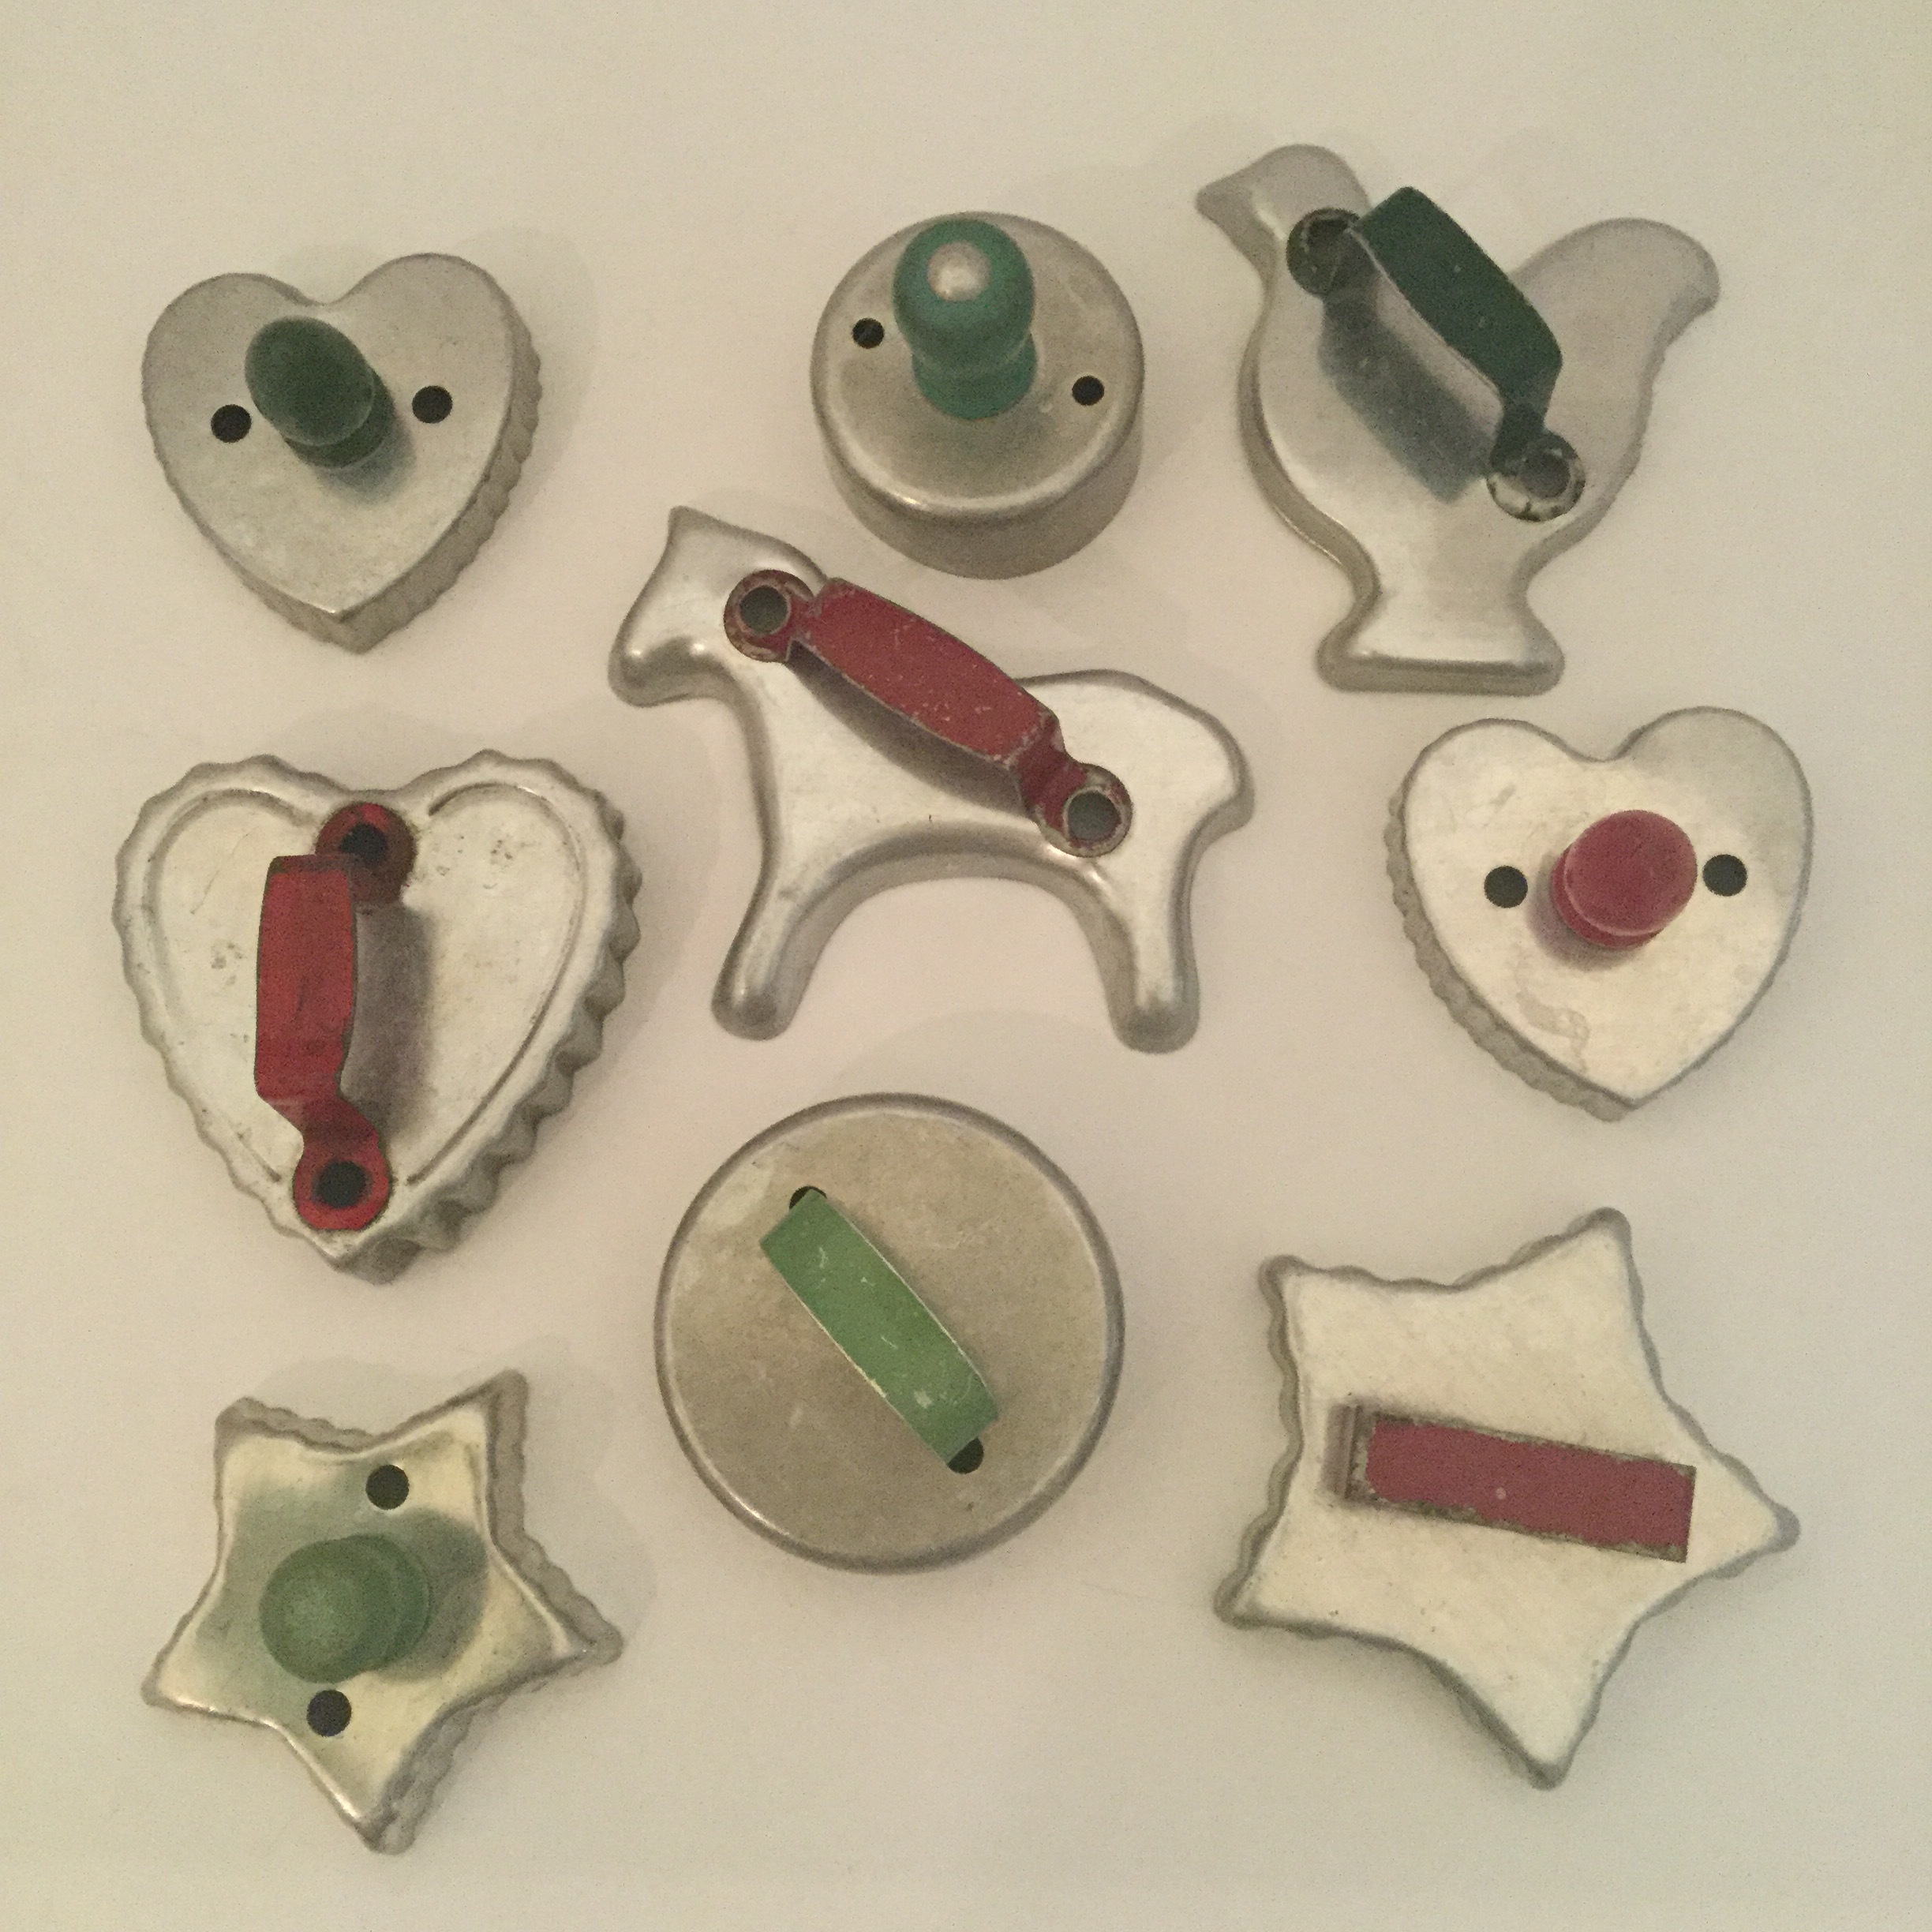 Antique Cookie Cutters History & Value